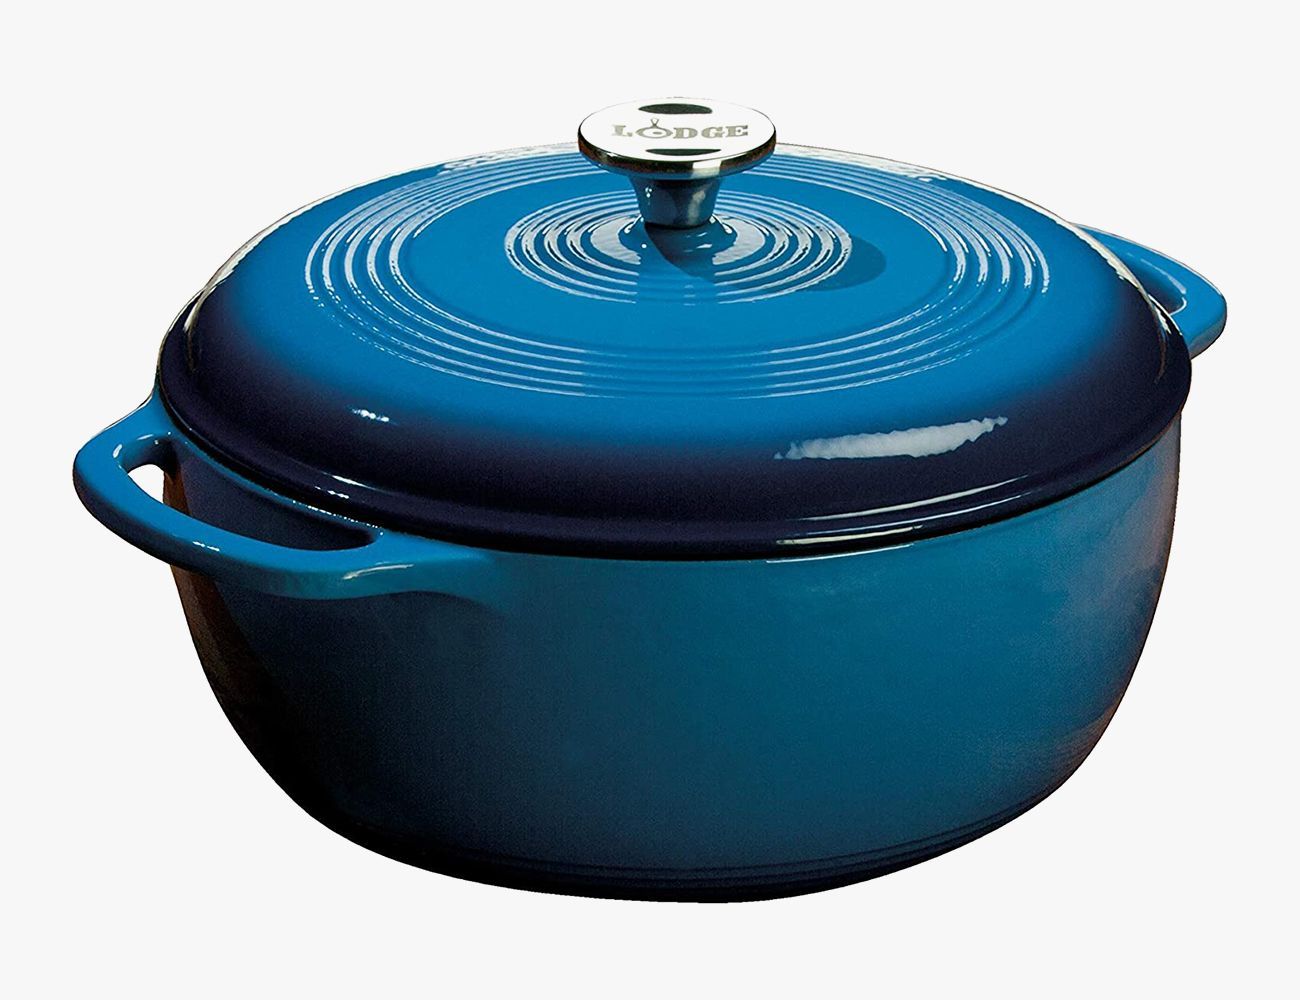 Cuisinart 9qt enameled cast iron Dutch oven - made in Vietnam! :  r/avoidchineseproducts